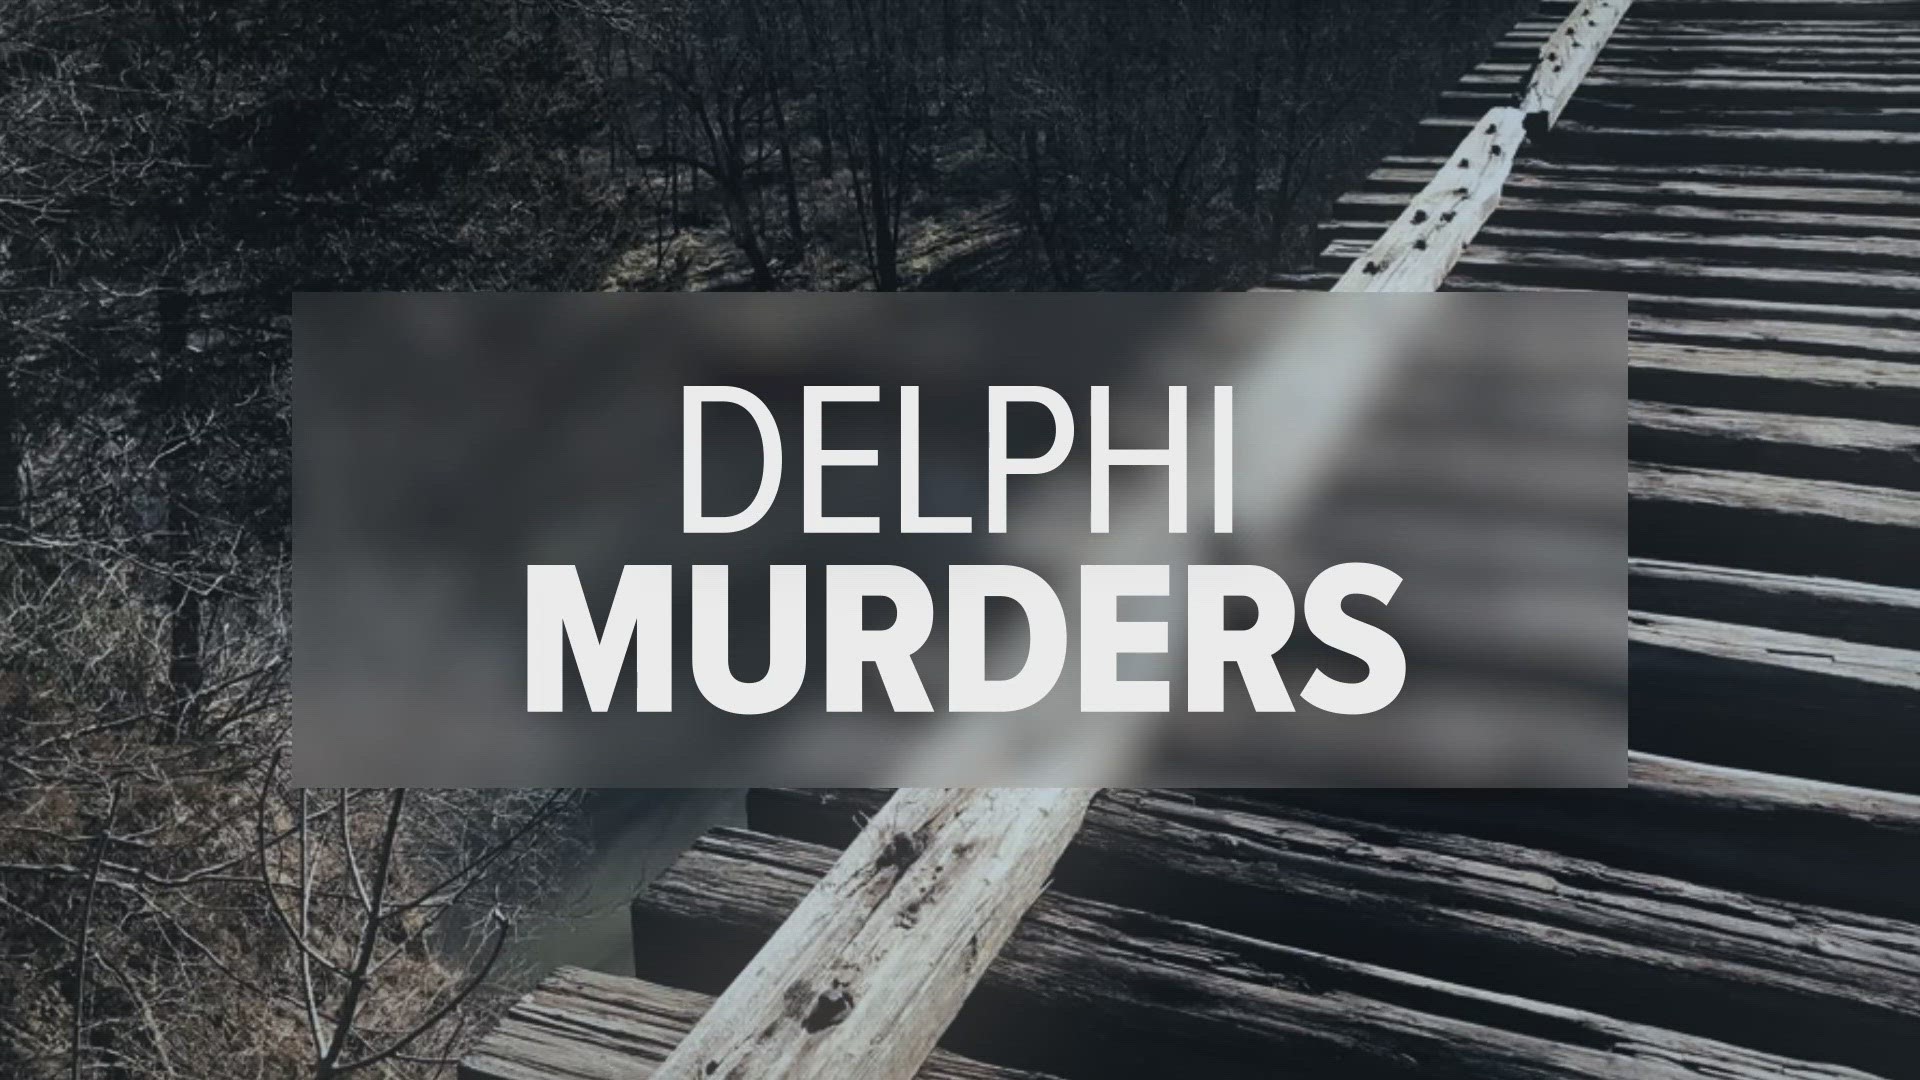 The judge in the Delphi murders case denied a request to move Richard Allen from the Westville Prison.